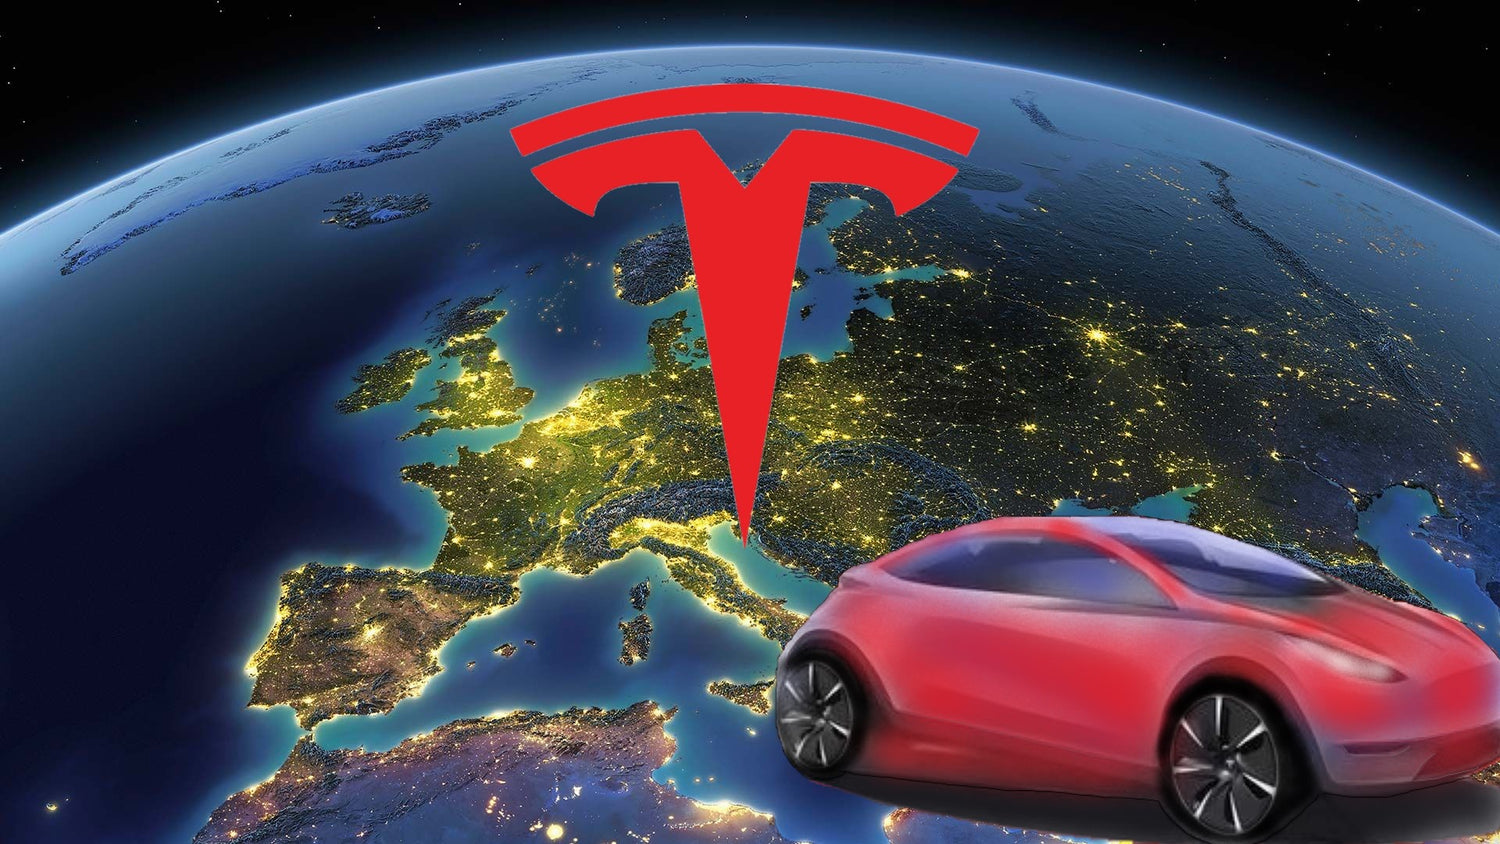 Tesla CEO Elon Musk Hints A Compact Model For European Market In The Future